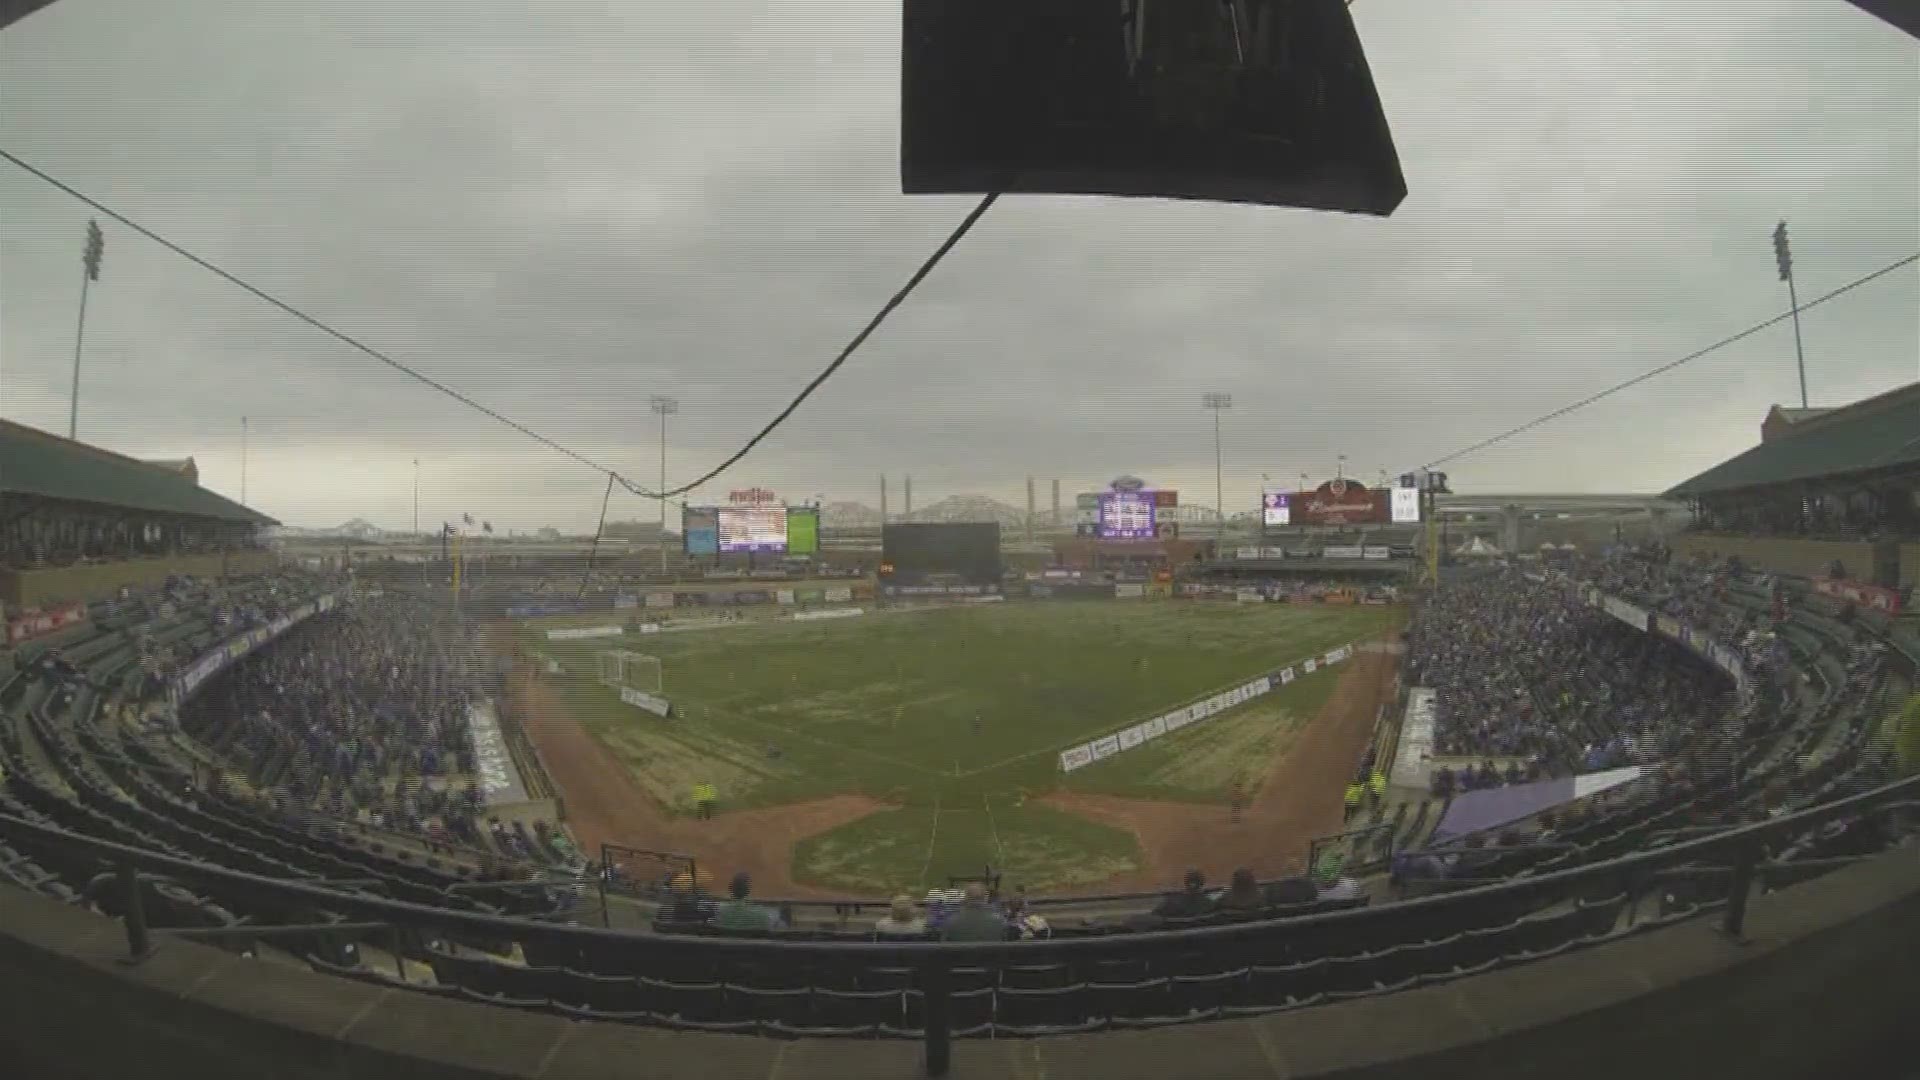 Preparing Slugger Field for Opening Day